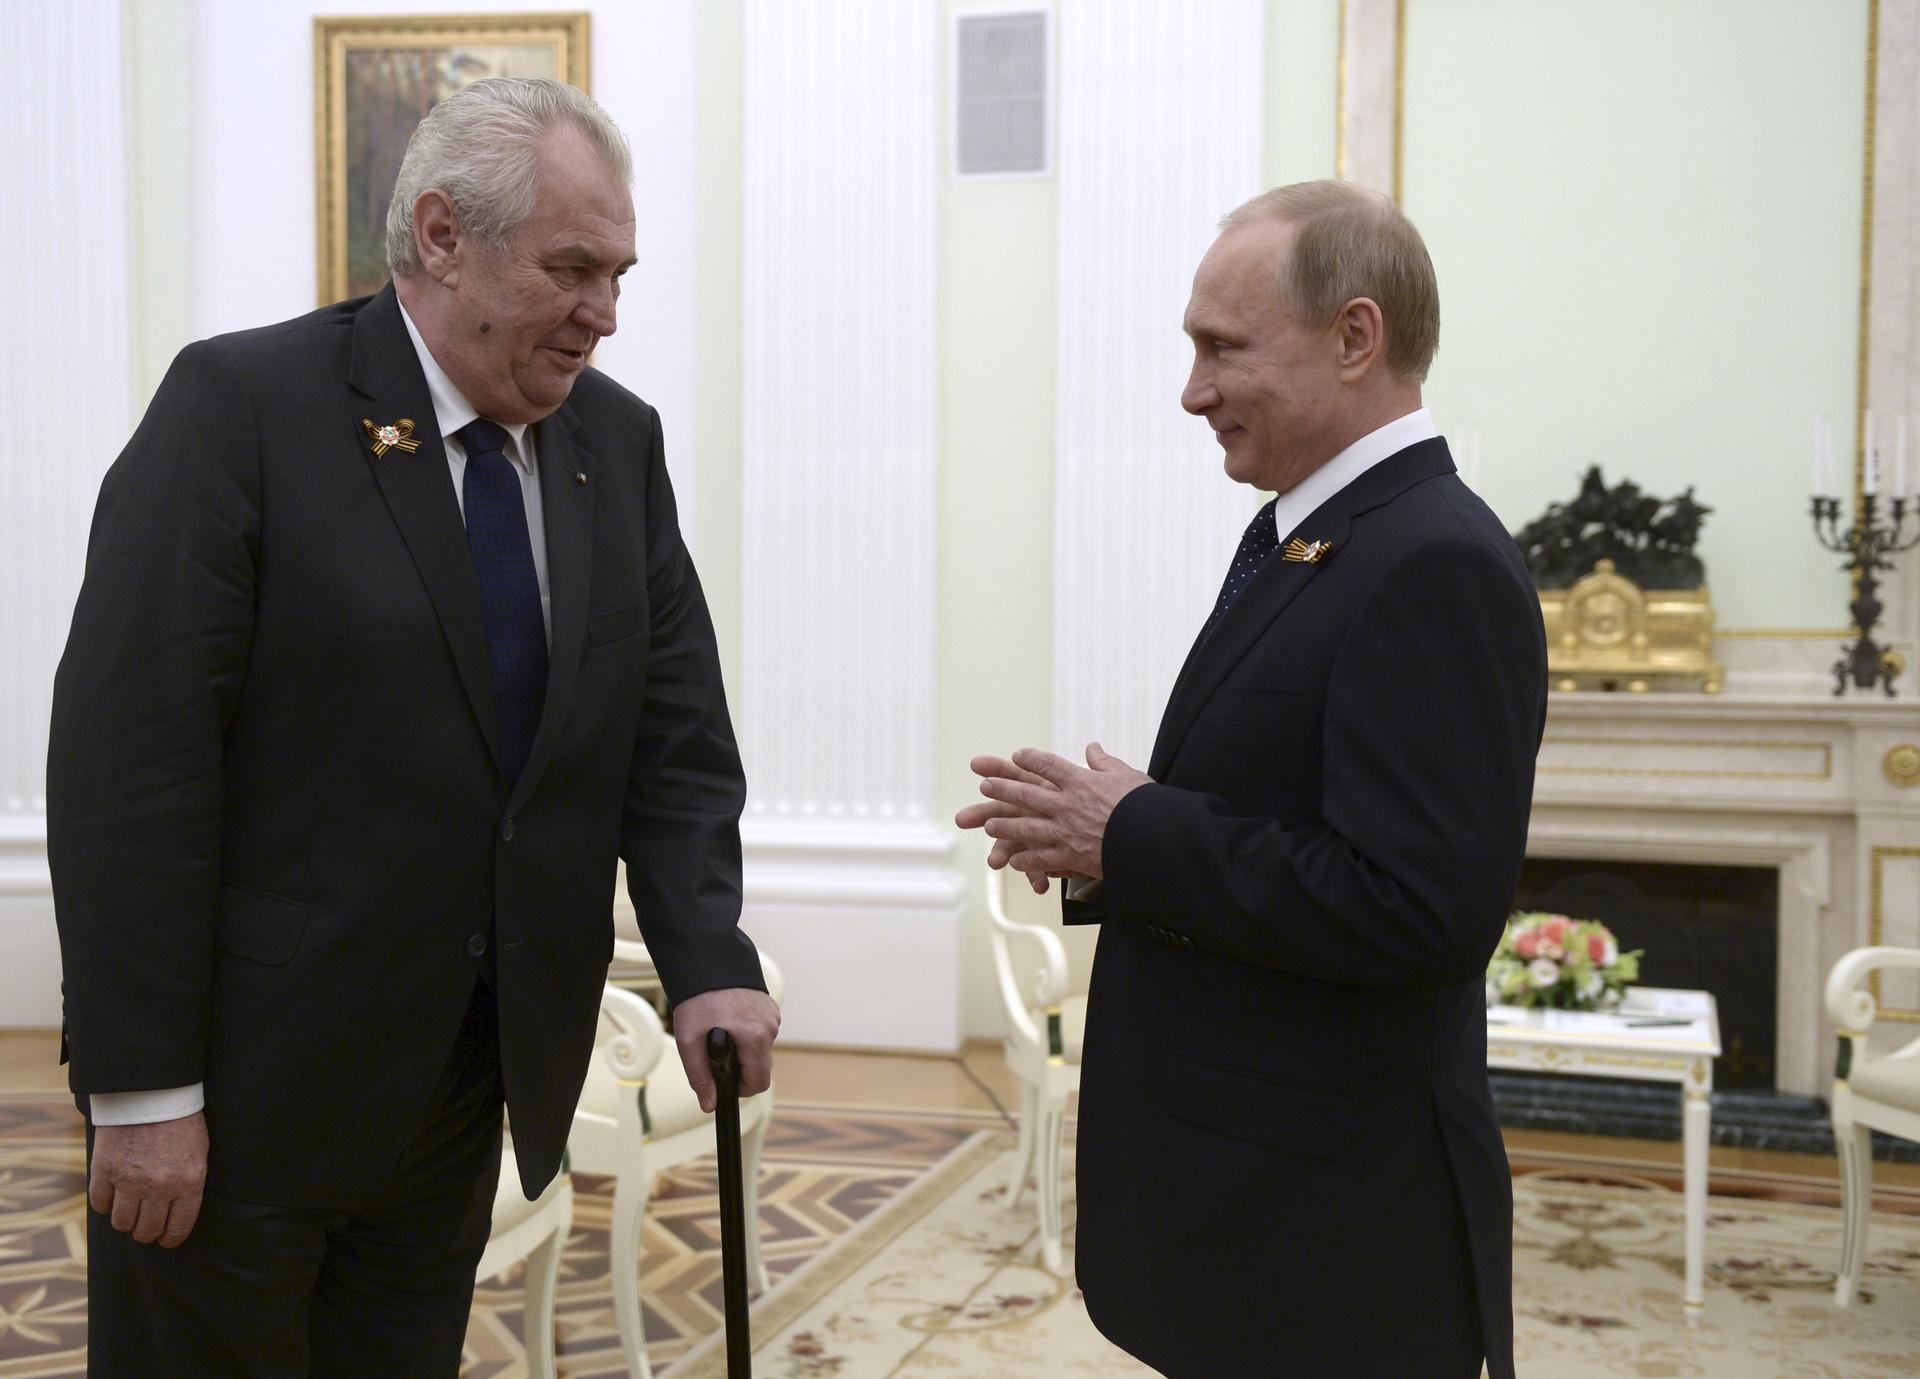 Czech President Milos Zeman, left, talks to Russian President Vladimir Putin during their meeting at the Kremlin in Moscow, Russia, on May 9, 2015.